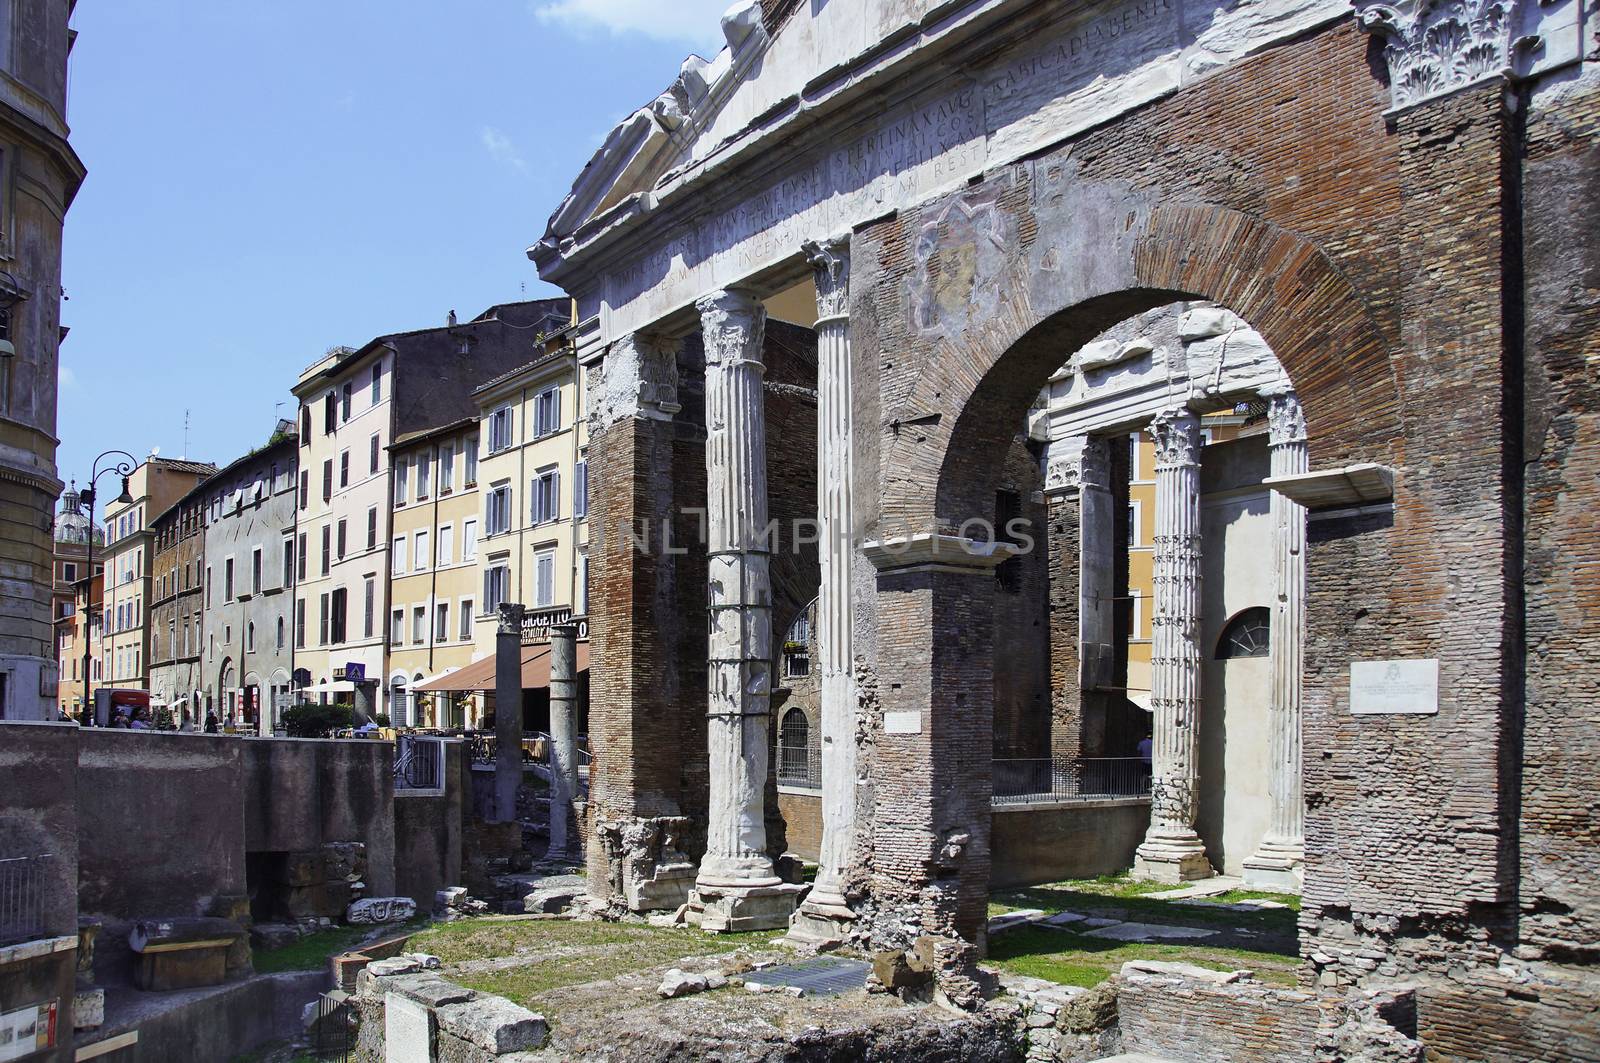 Photo of the Monument Portico of Octavia, Remains of an ancient walkway originally built in the 2nd century B.C. to link two Roman temples.